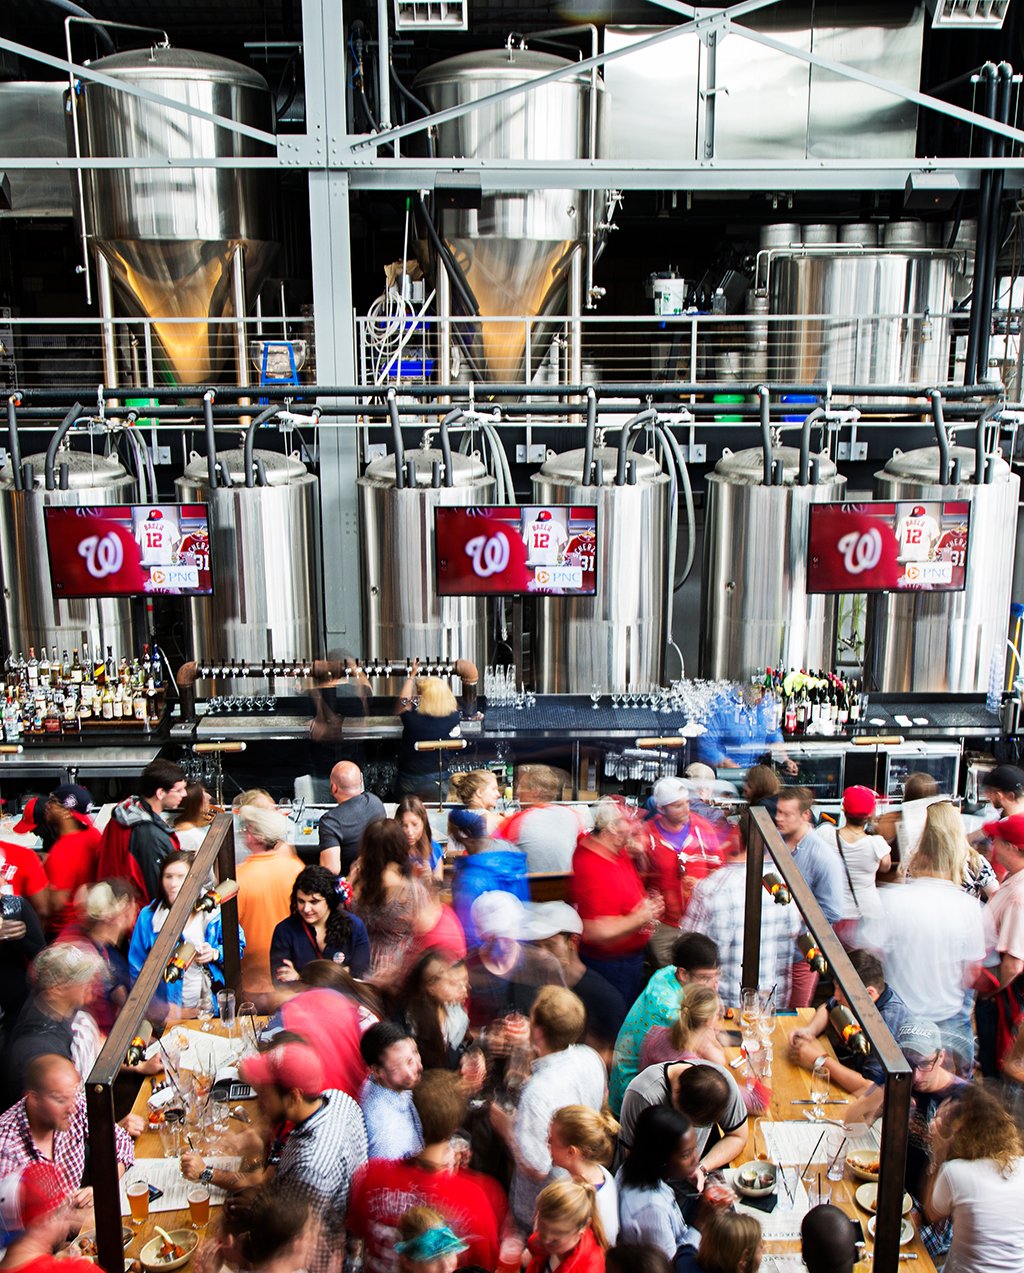 DC's Bluejacket brewery. Photograph by Scott Suchman.